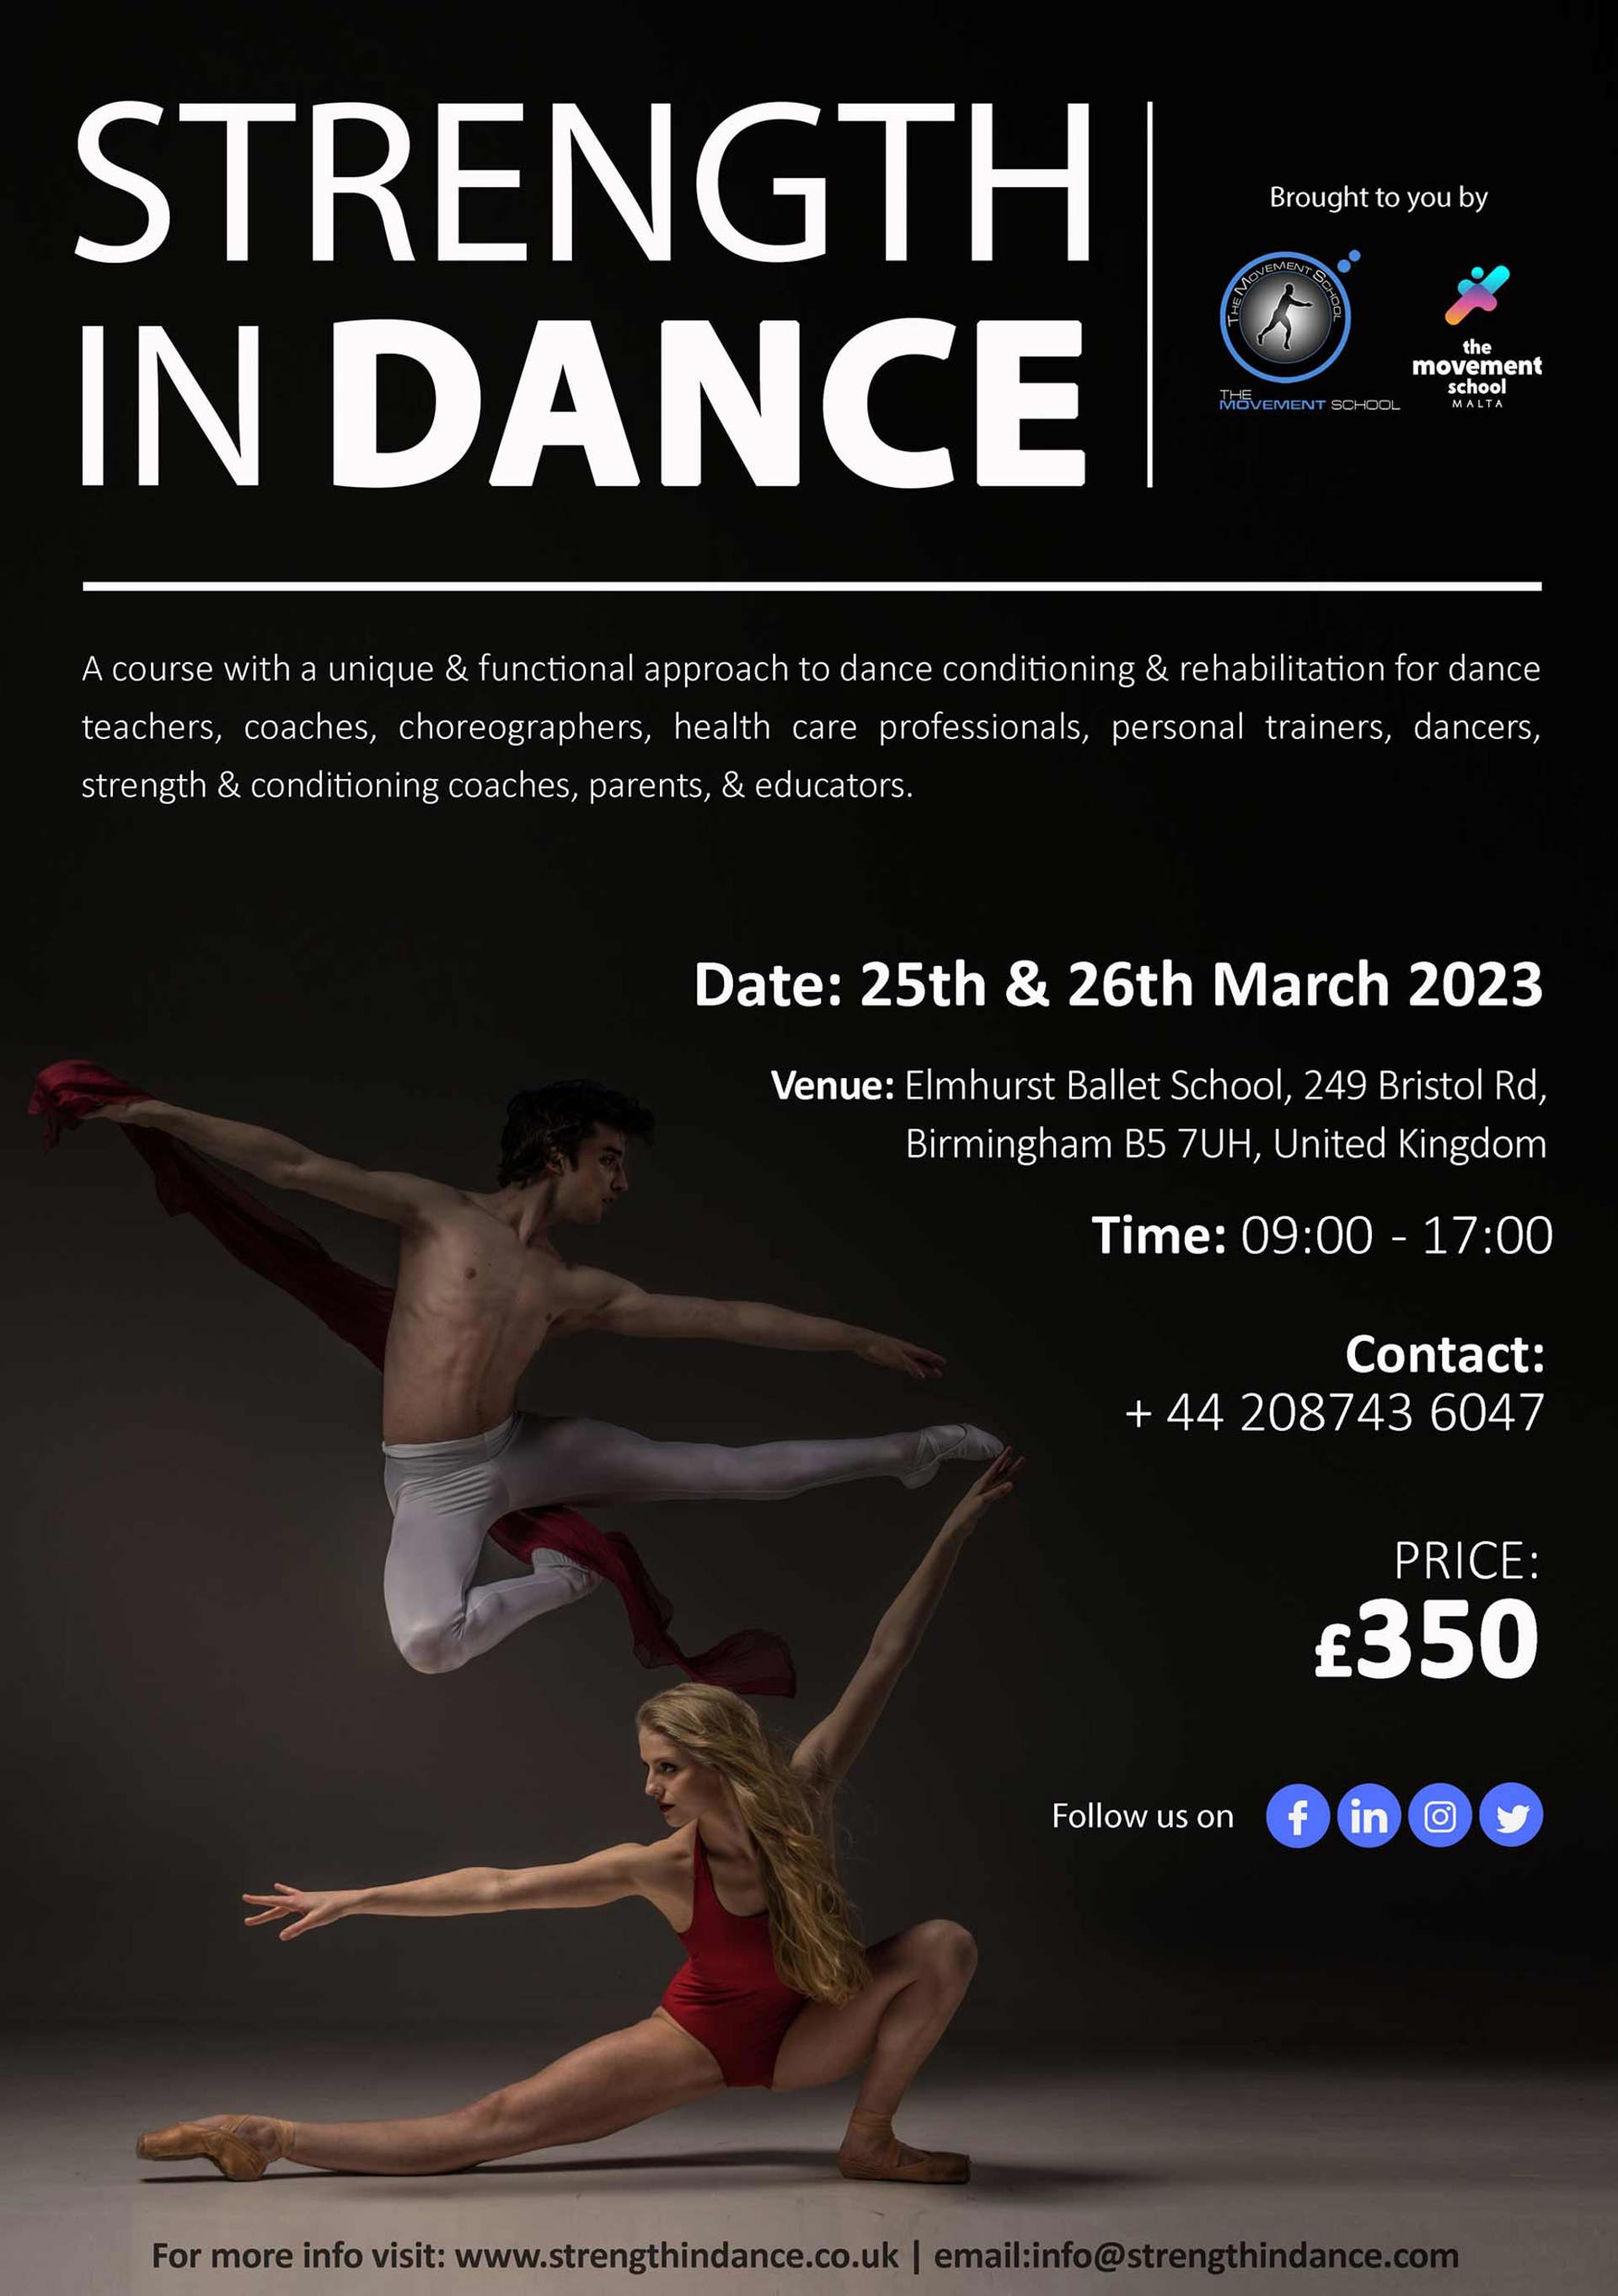 poster with text saying Strength In Dance with two dancers one jumper and the other lunging 